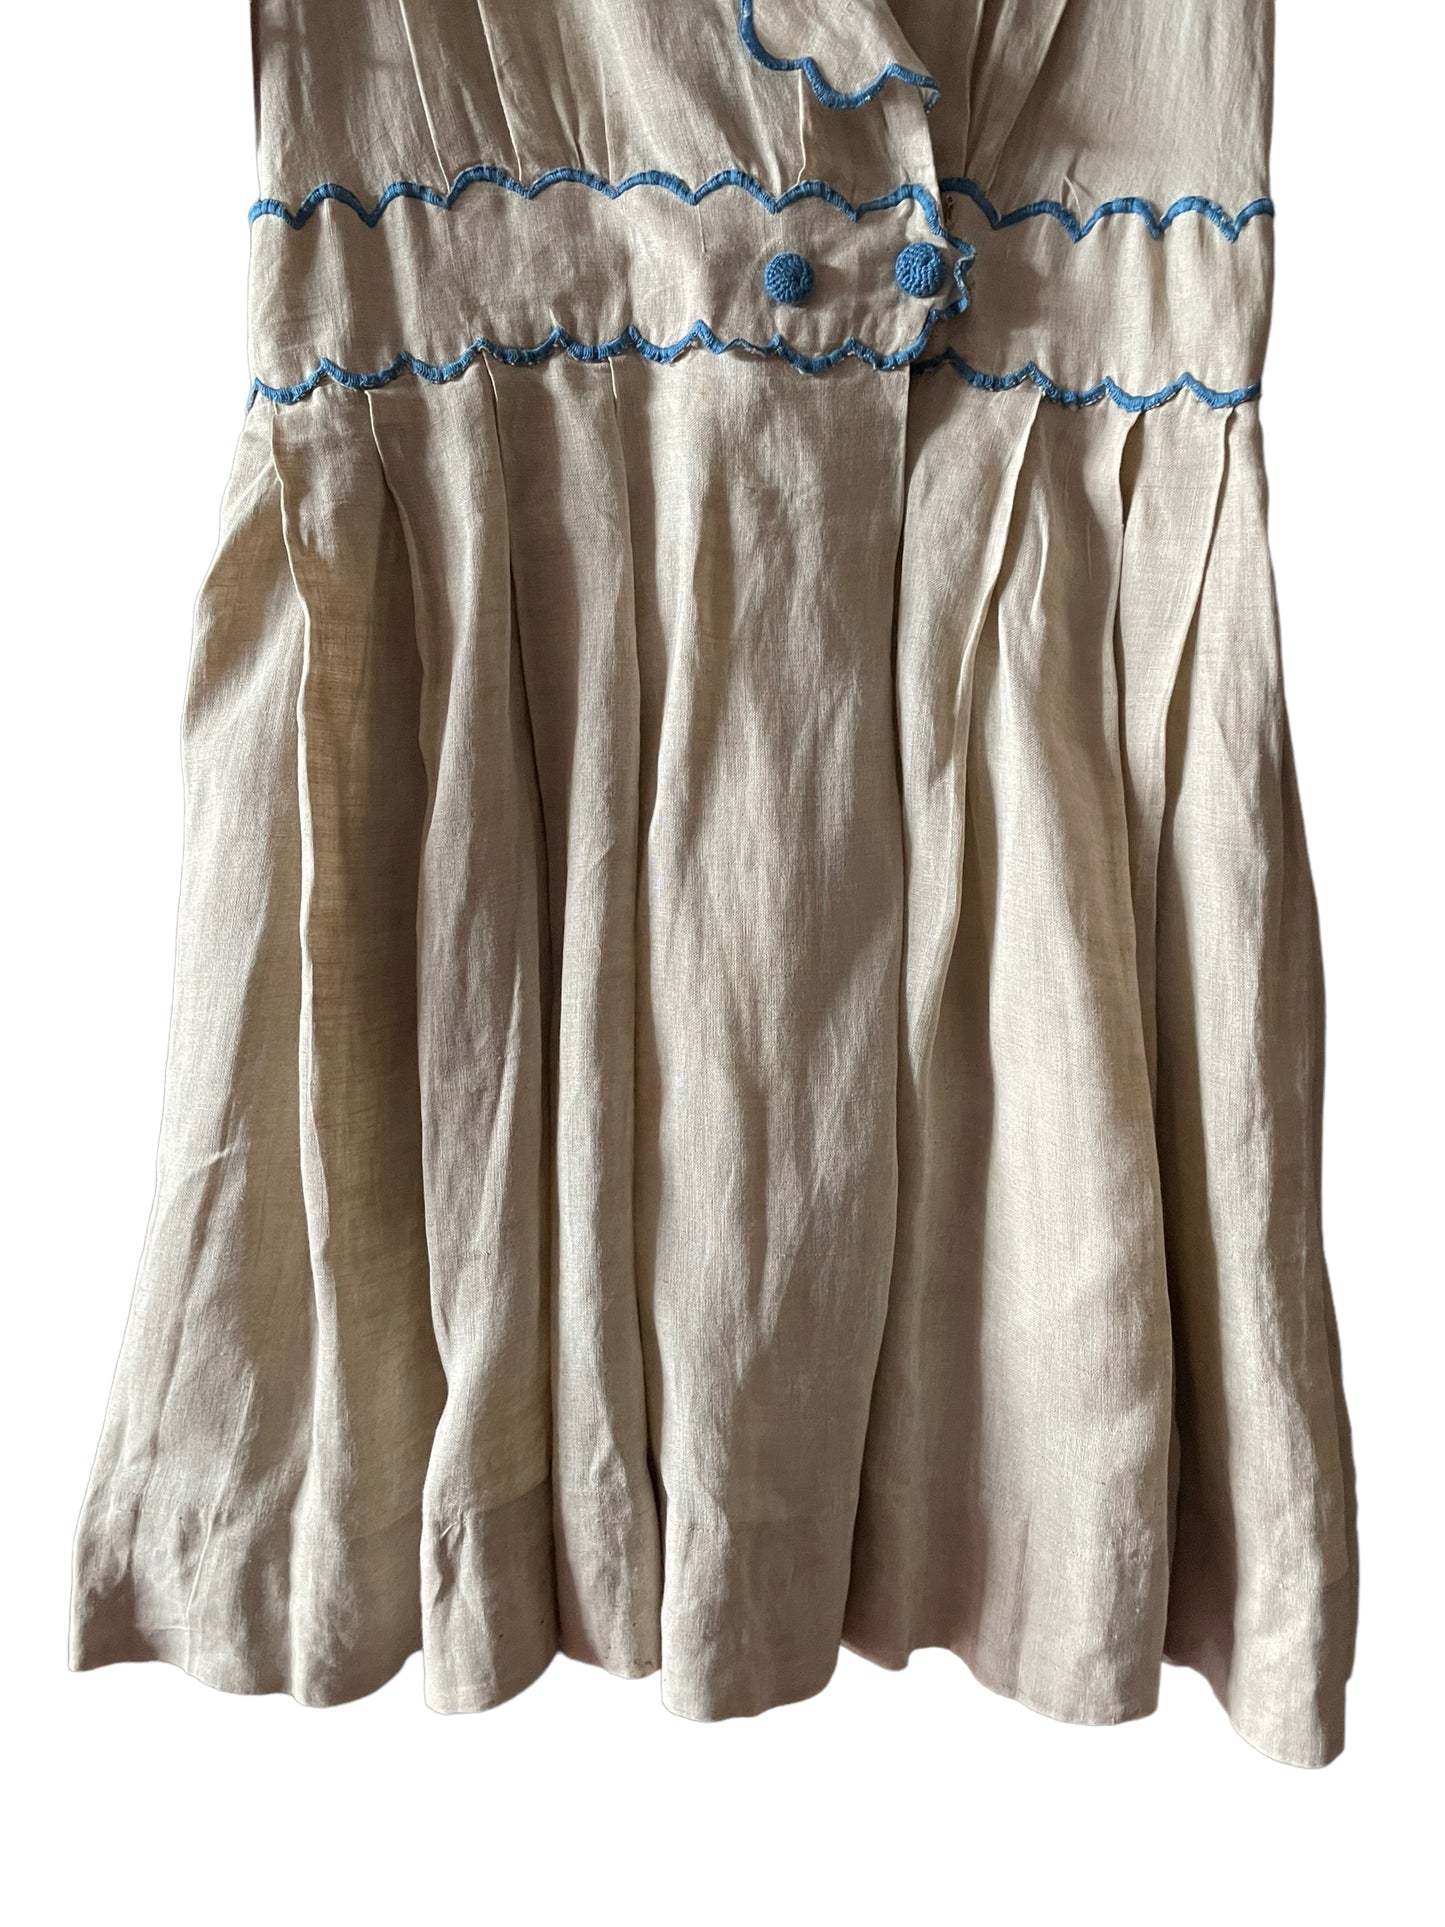 Front skirt view of Antique Early 1900s Linen Dress SZ XS